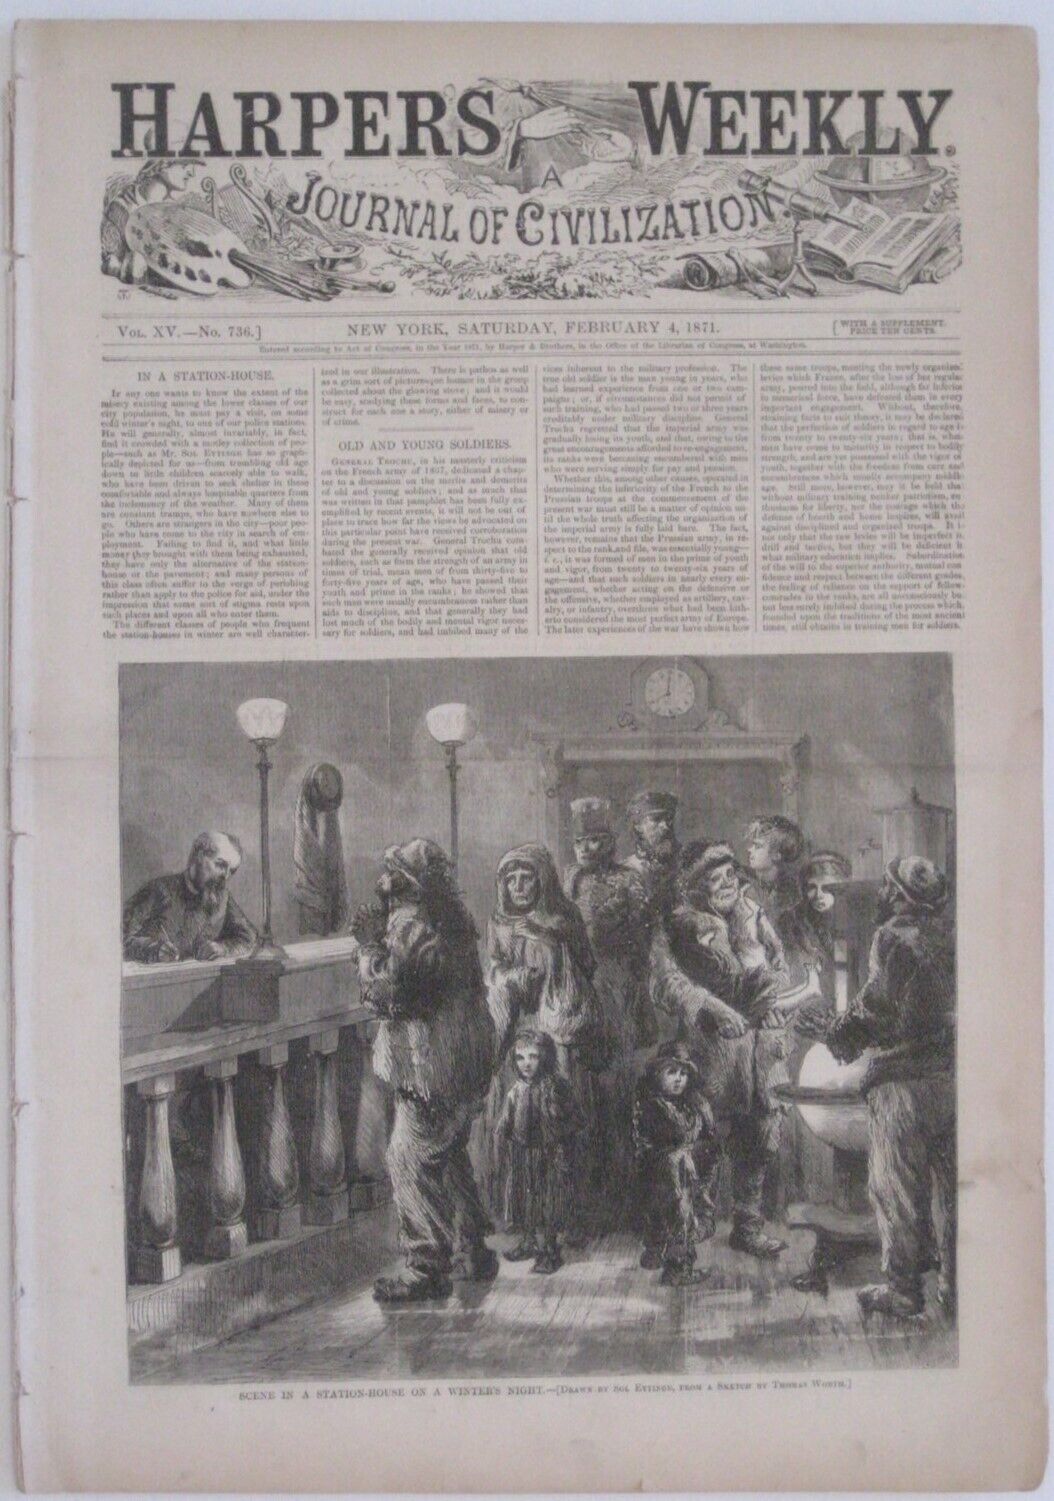 Feb 4 1871 Harper's Weekly with THE LAST BIVOUAC Franco-Prussian War Engraving